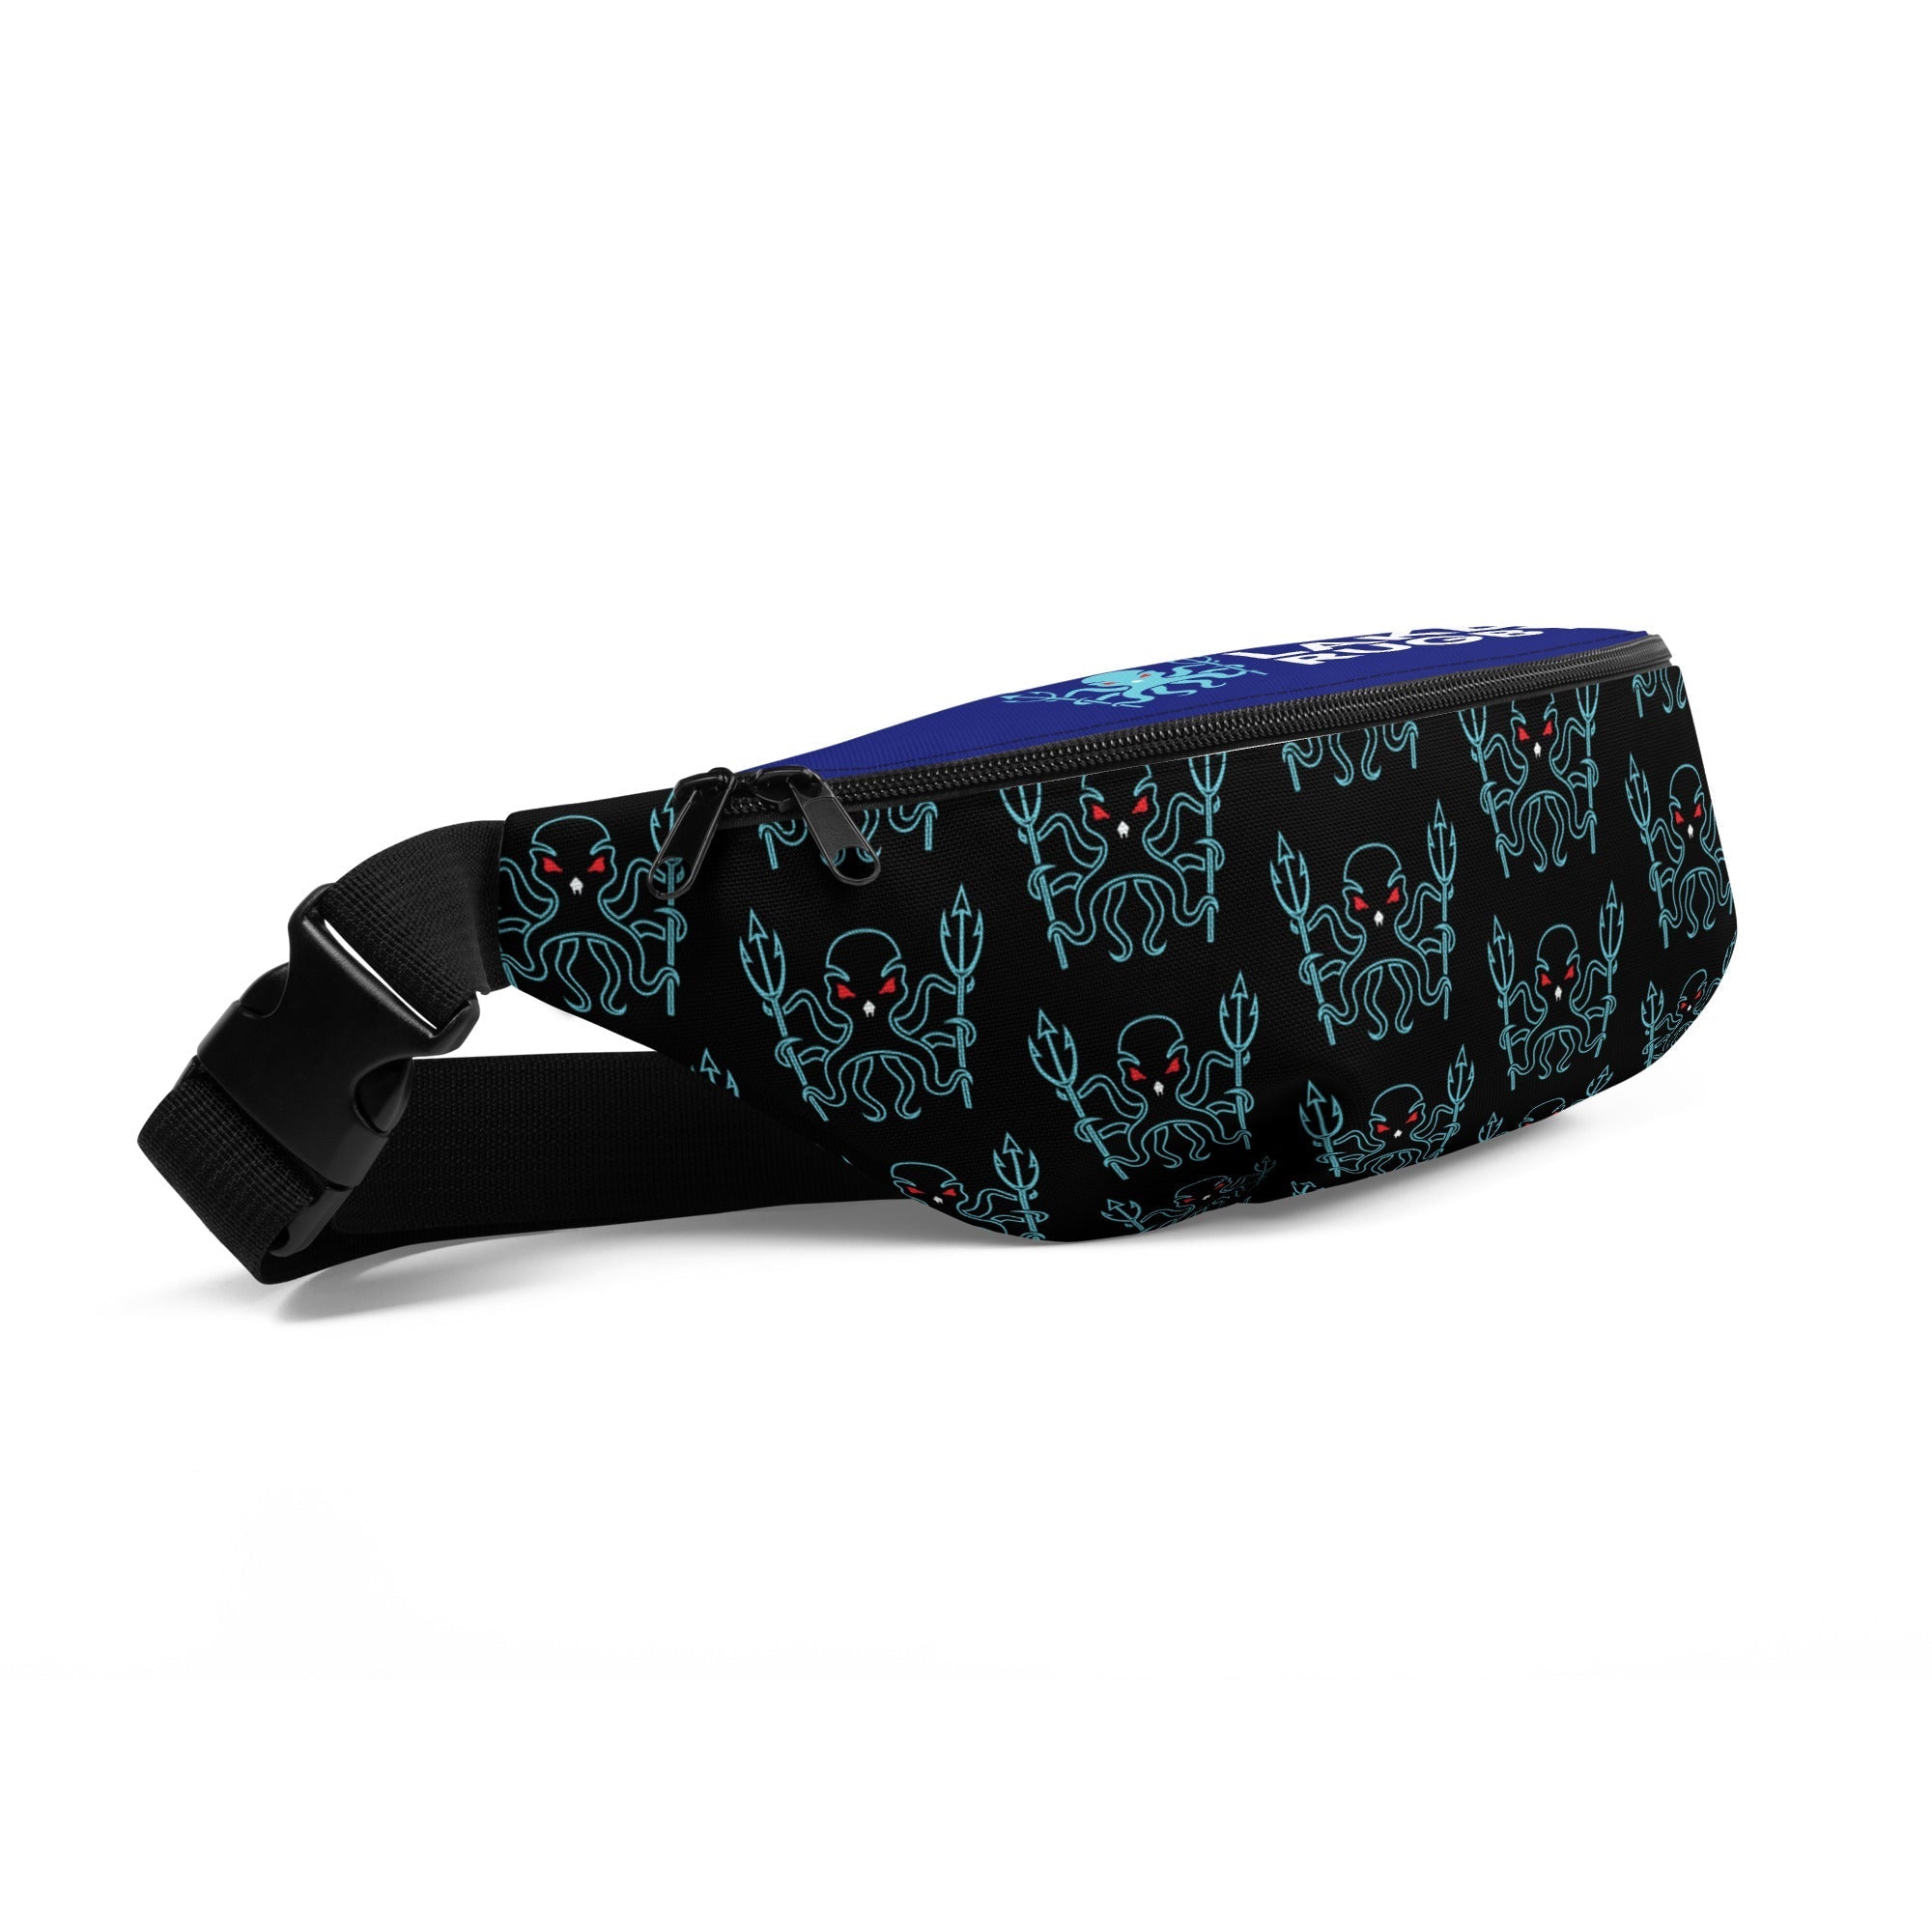 Rugby Imports Lakers Rugby 7s Fanny Pack